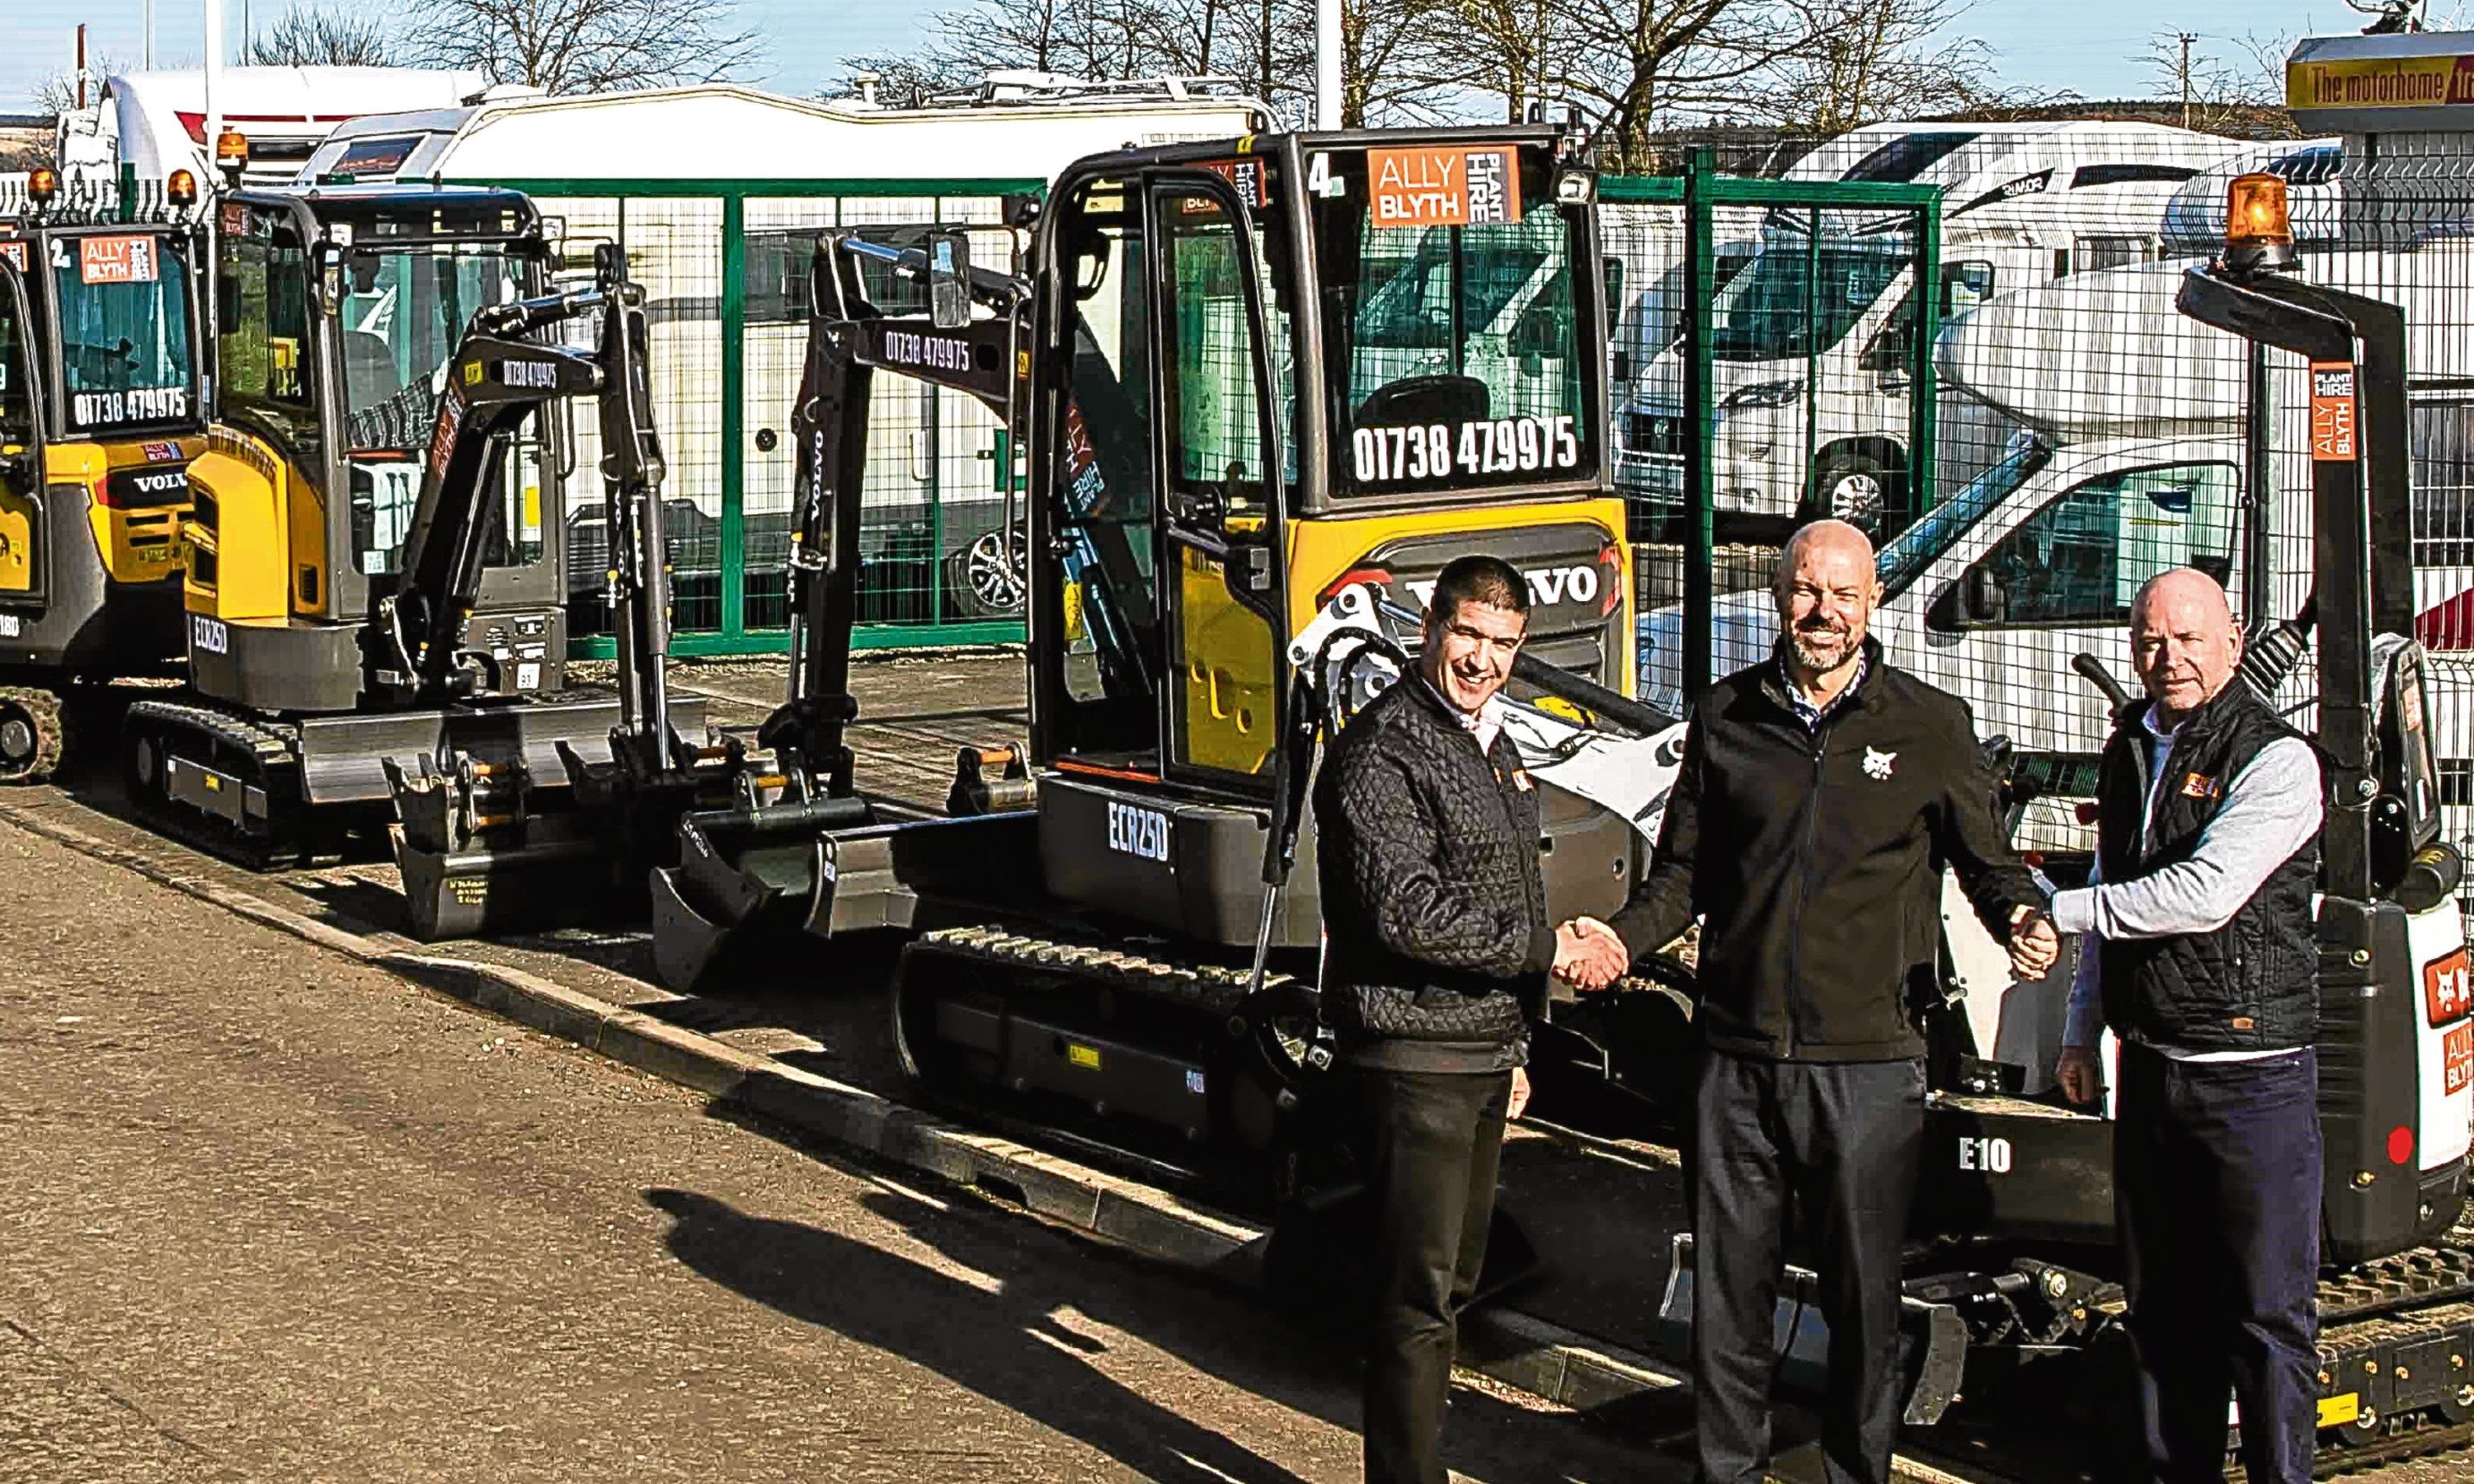 Ally Blyth Plant Hire Ally Blyth, managing director, Leigh Dalgleish, sales manager and Bobby Berwick, business operations director.